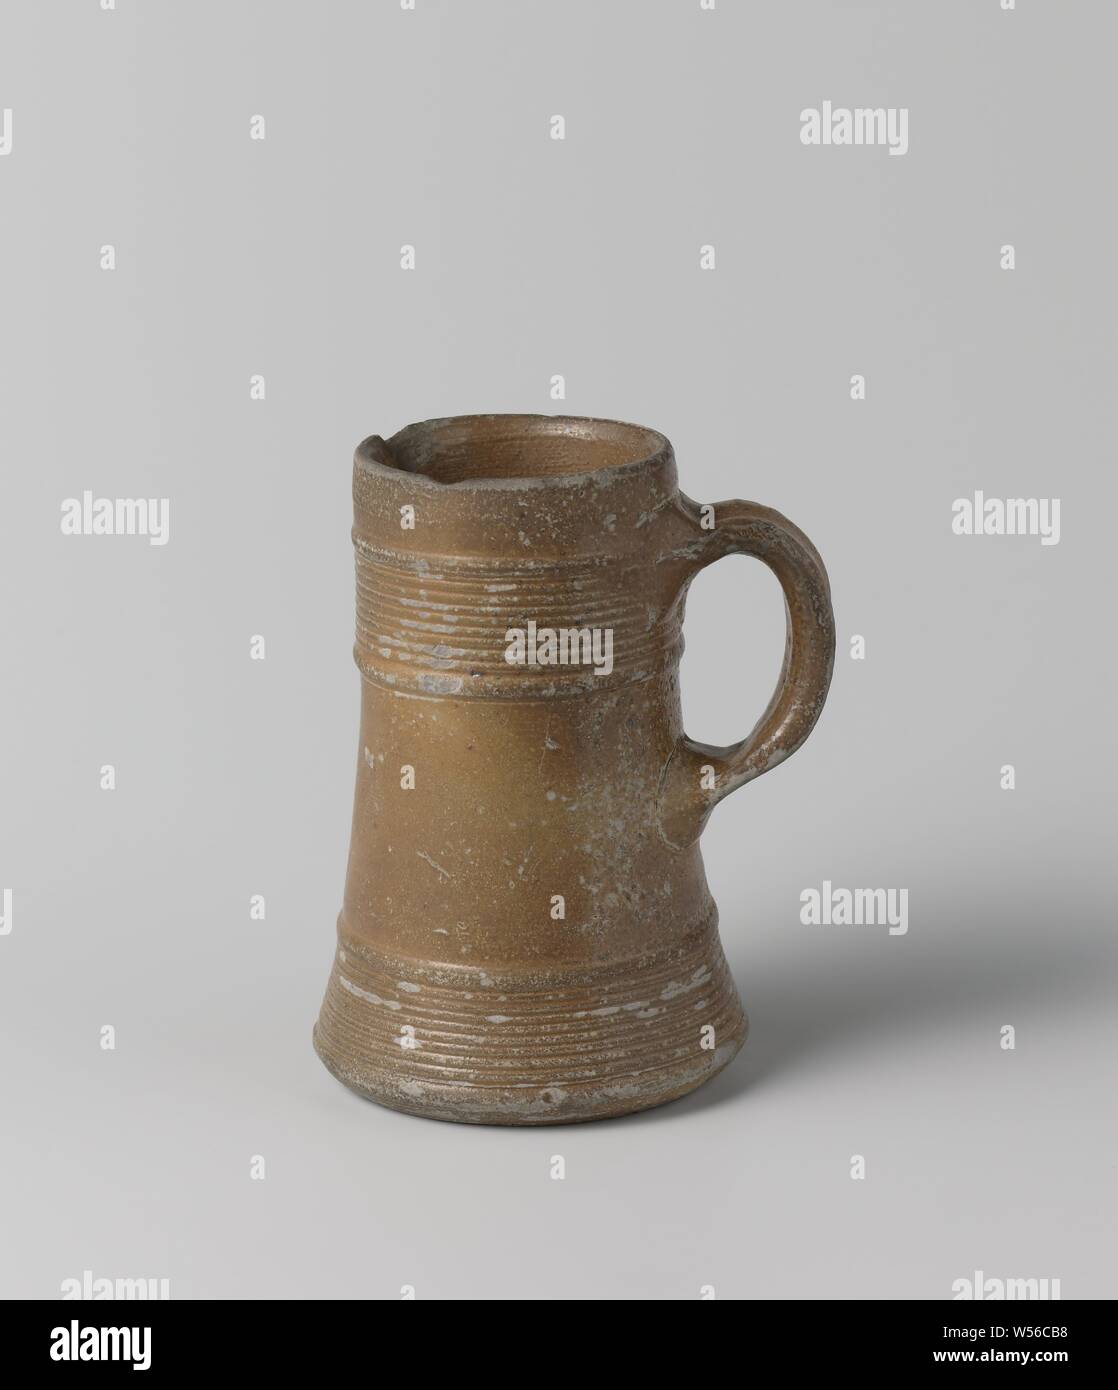 Download Stoneware Beer Mug High Resolution Stock Photography And Images Alamy PSD Mockup Templates